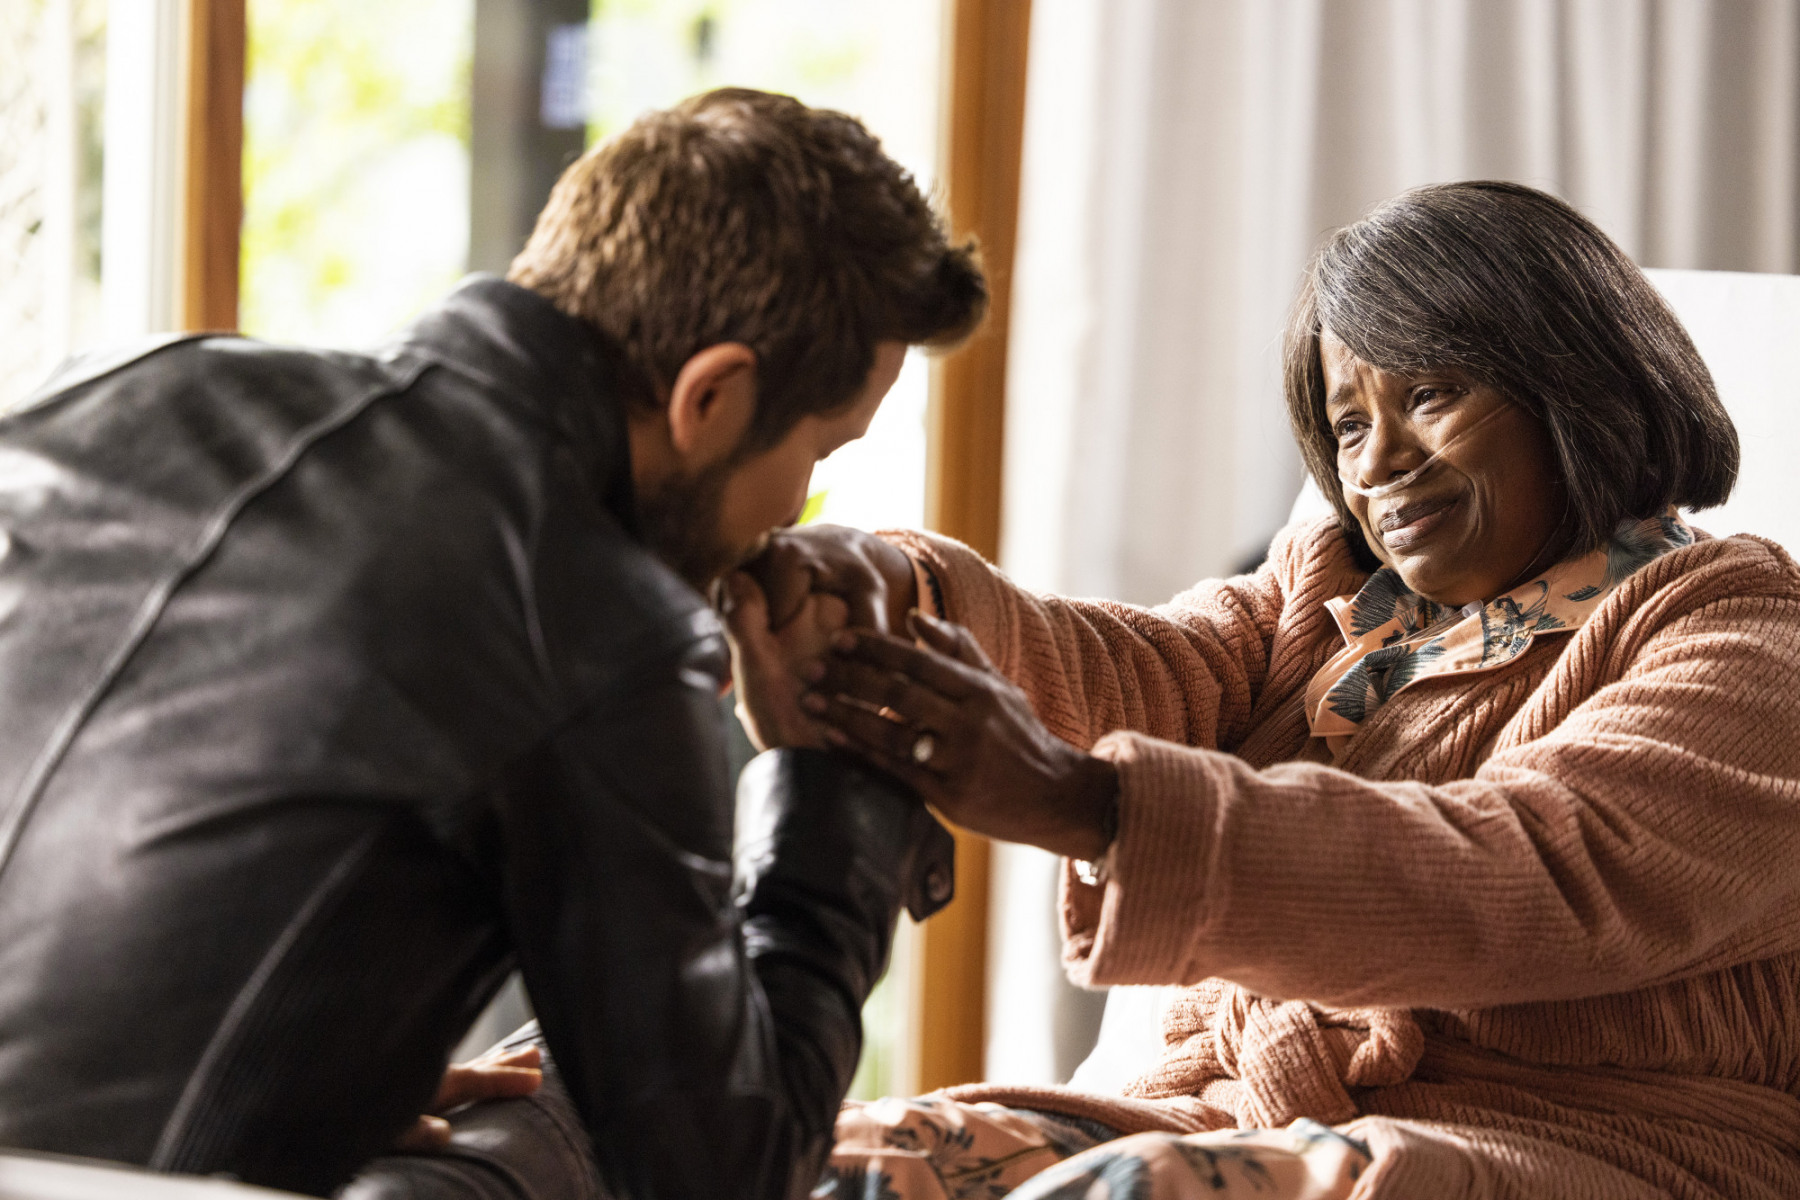 THE RESIDENT: L-R: Matt Czuchry and guest star Summer Selby in the “All We Have Is Now“ episode of THE RESIDENT airing Tuesday, April 19 (8:00-9:00 PM ET/PT) on FOX. ©2022 Fox Media LLC Cr: Nathan Bolster